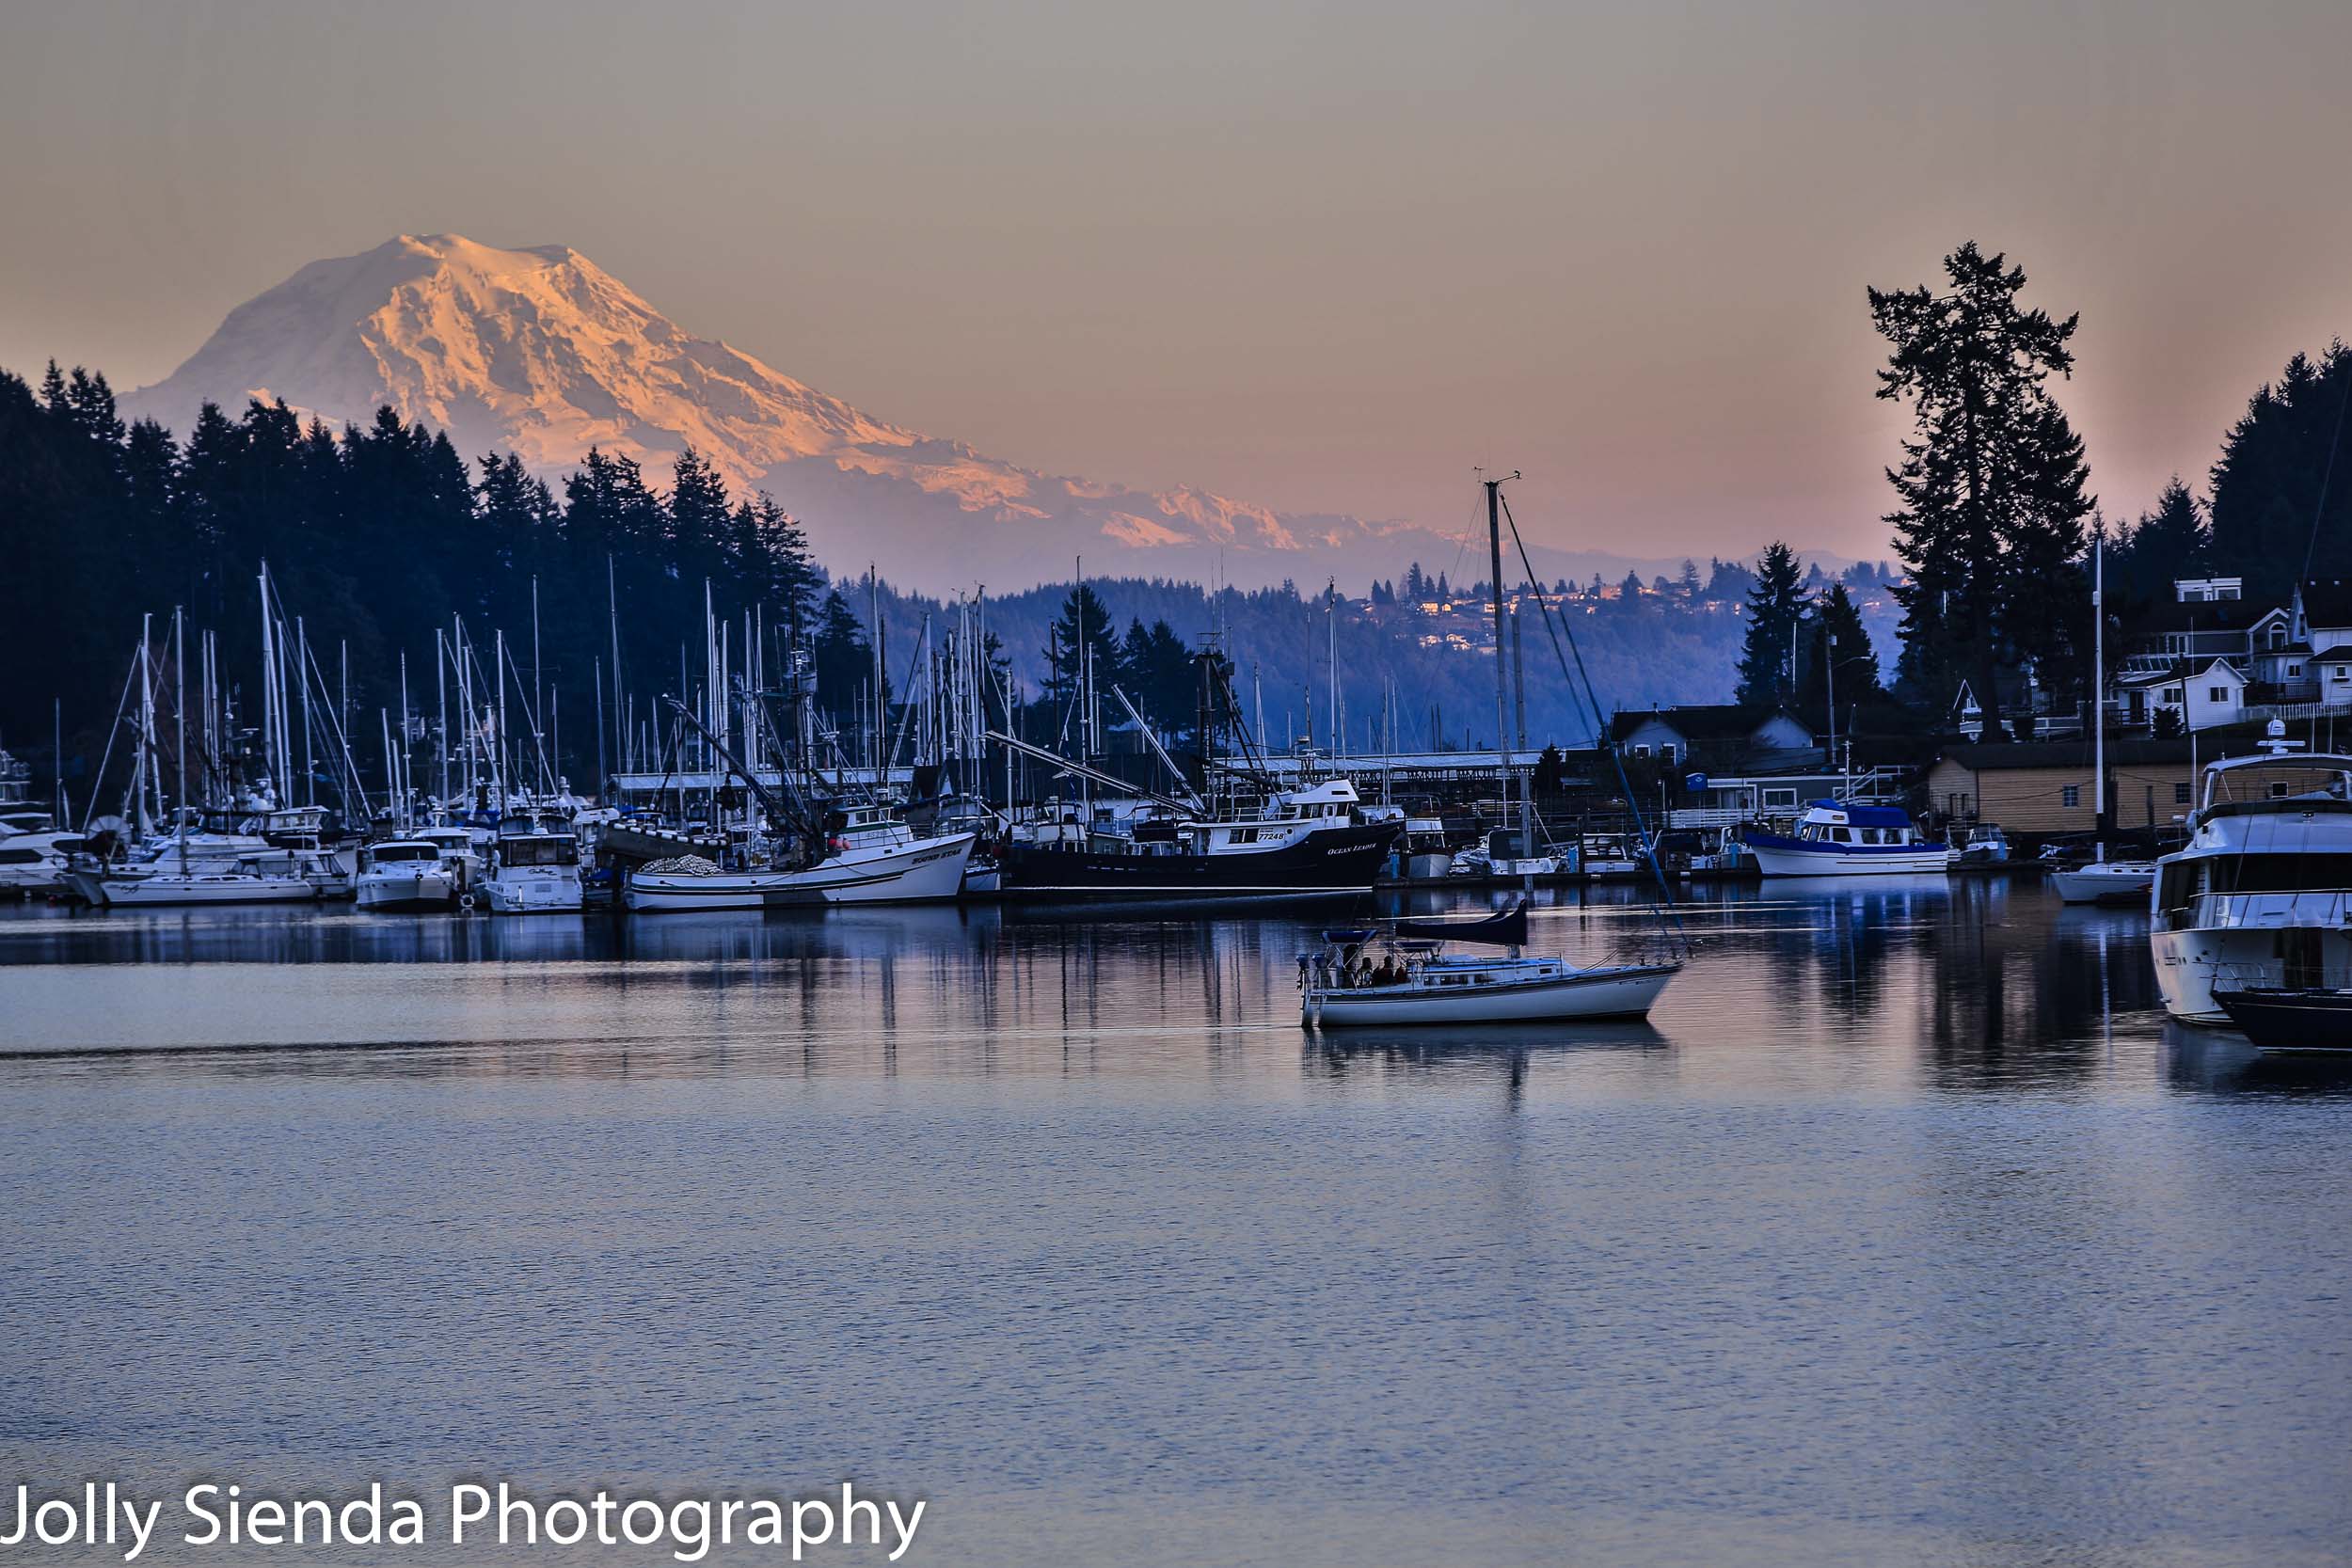 Sunset on Mount Rainier as a sailboat glides by in a marina